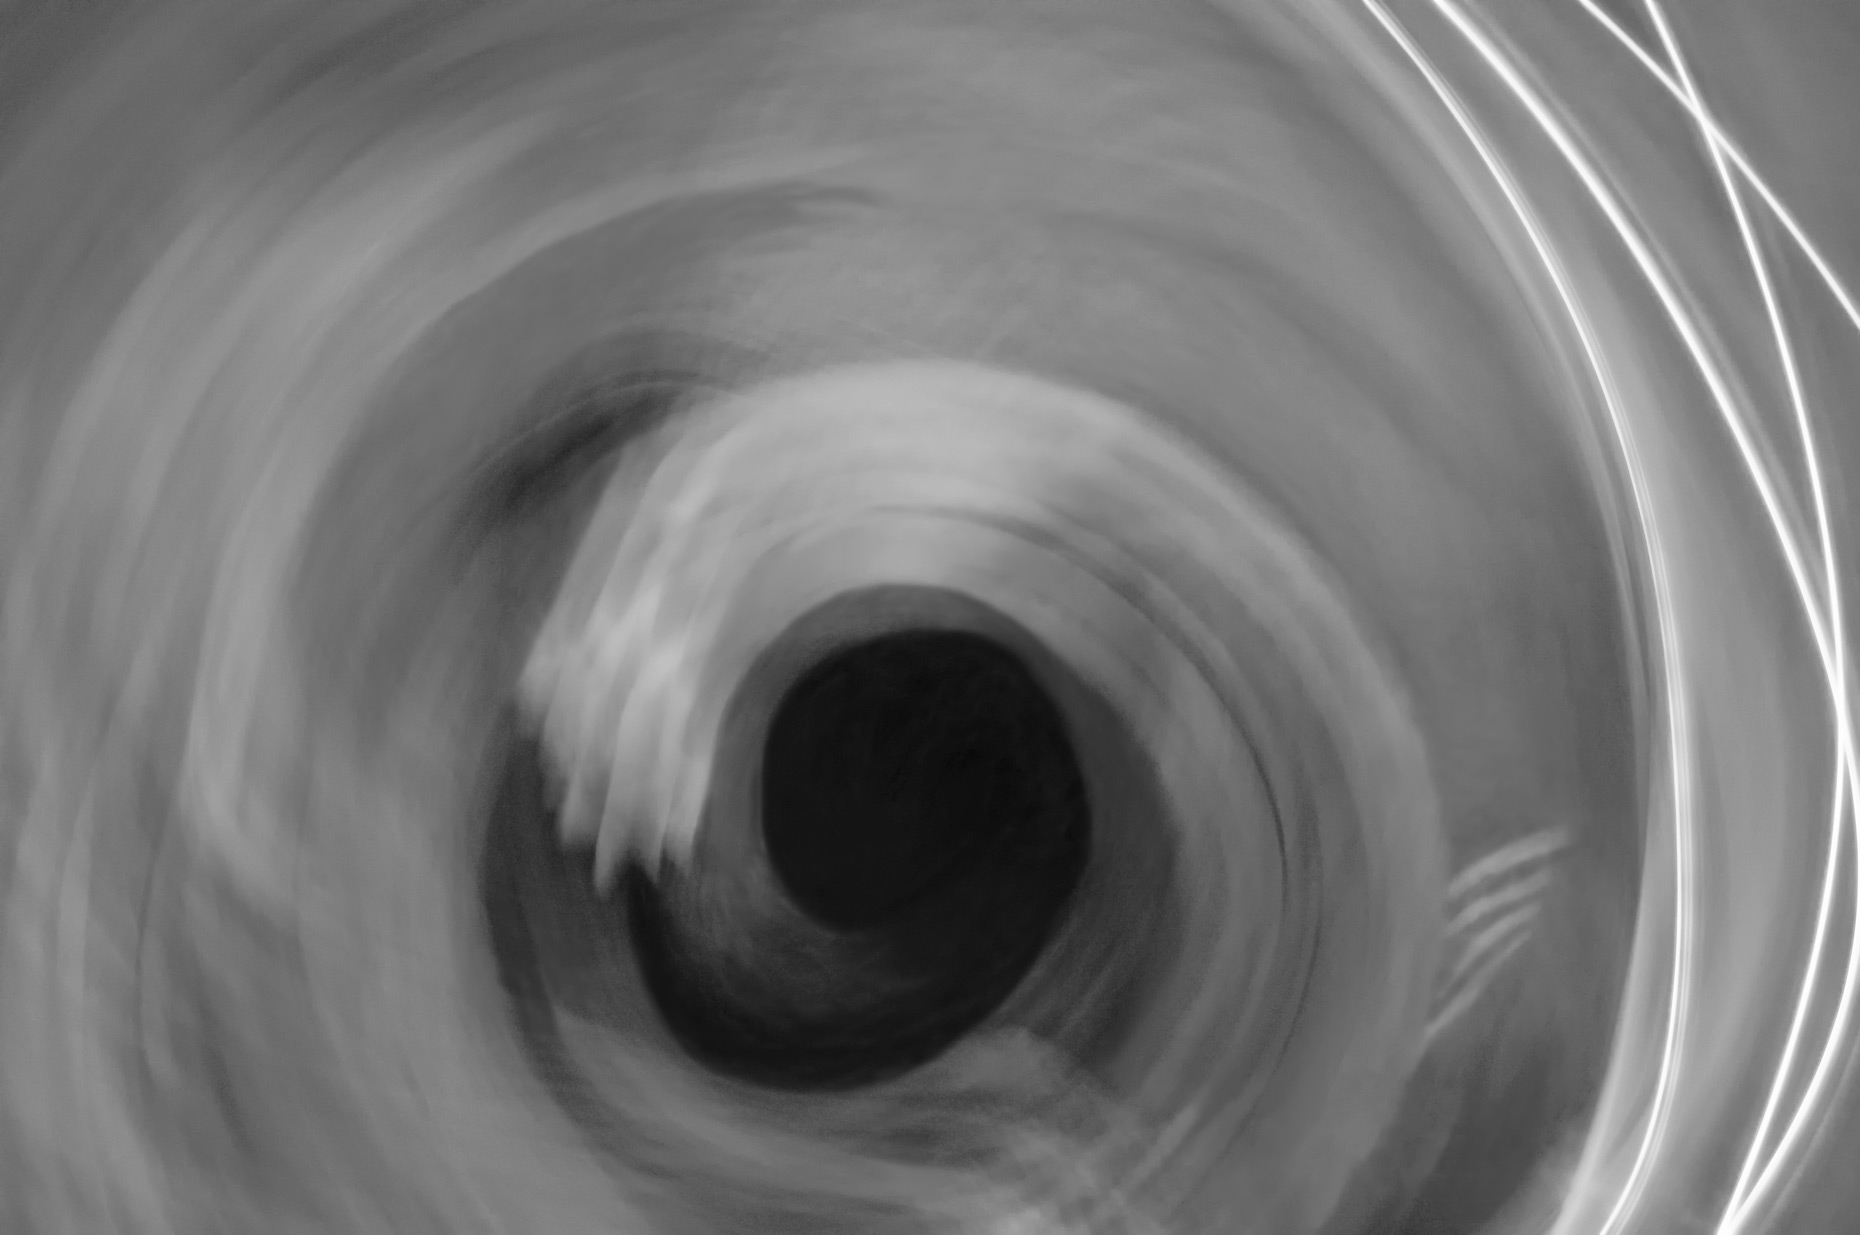 Abstract-Art-Black-and-White-One-Thought-Wave-Laria-Saunders.jpg